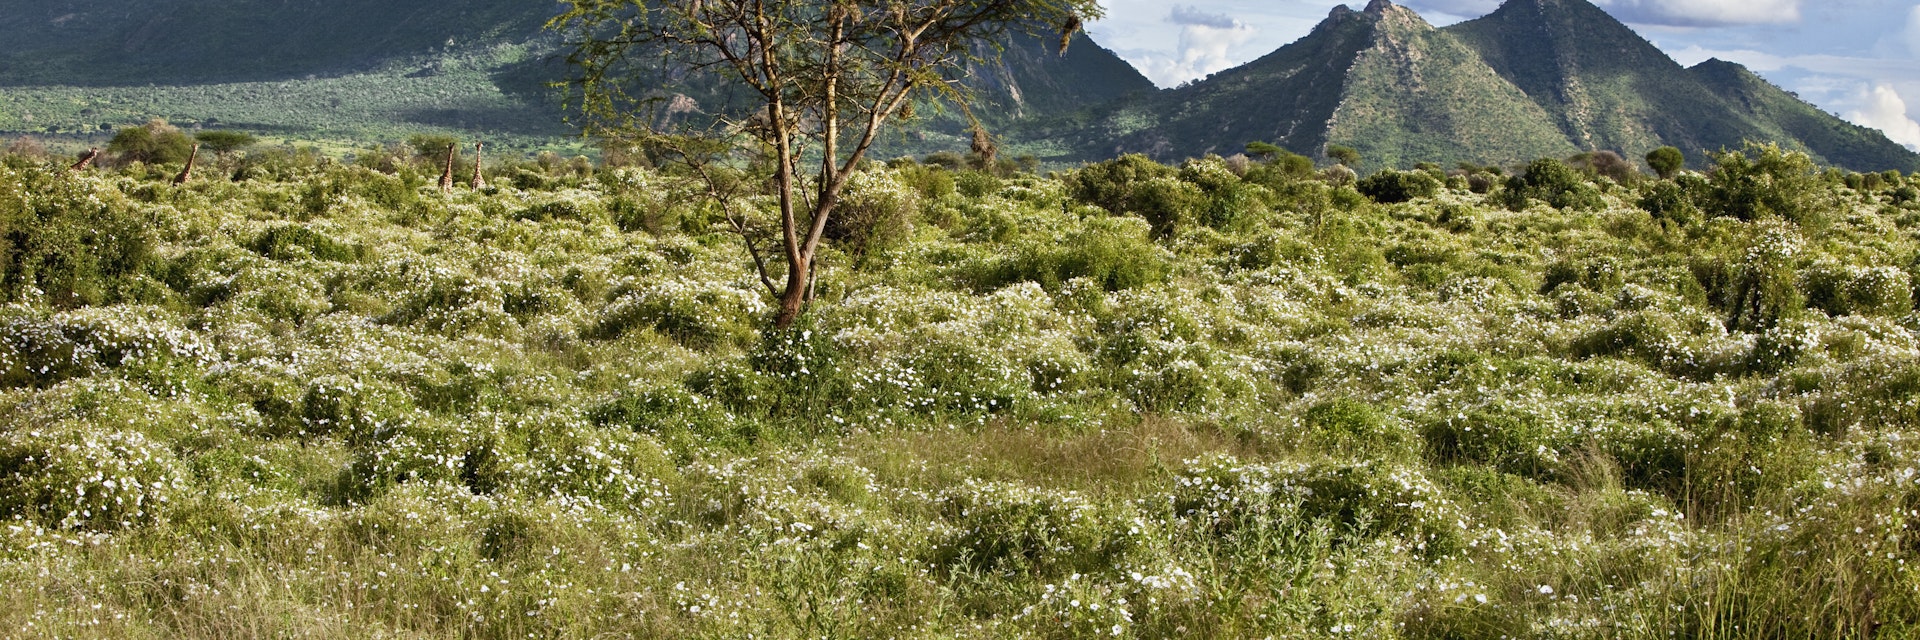 After abundant rain, the countryside in Kenya s Tsavo West National Park is covered with wild flowers. Maasai giraffes can be seen against the backdrop of Ngulia Mountain.